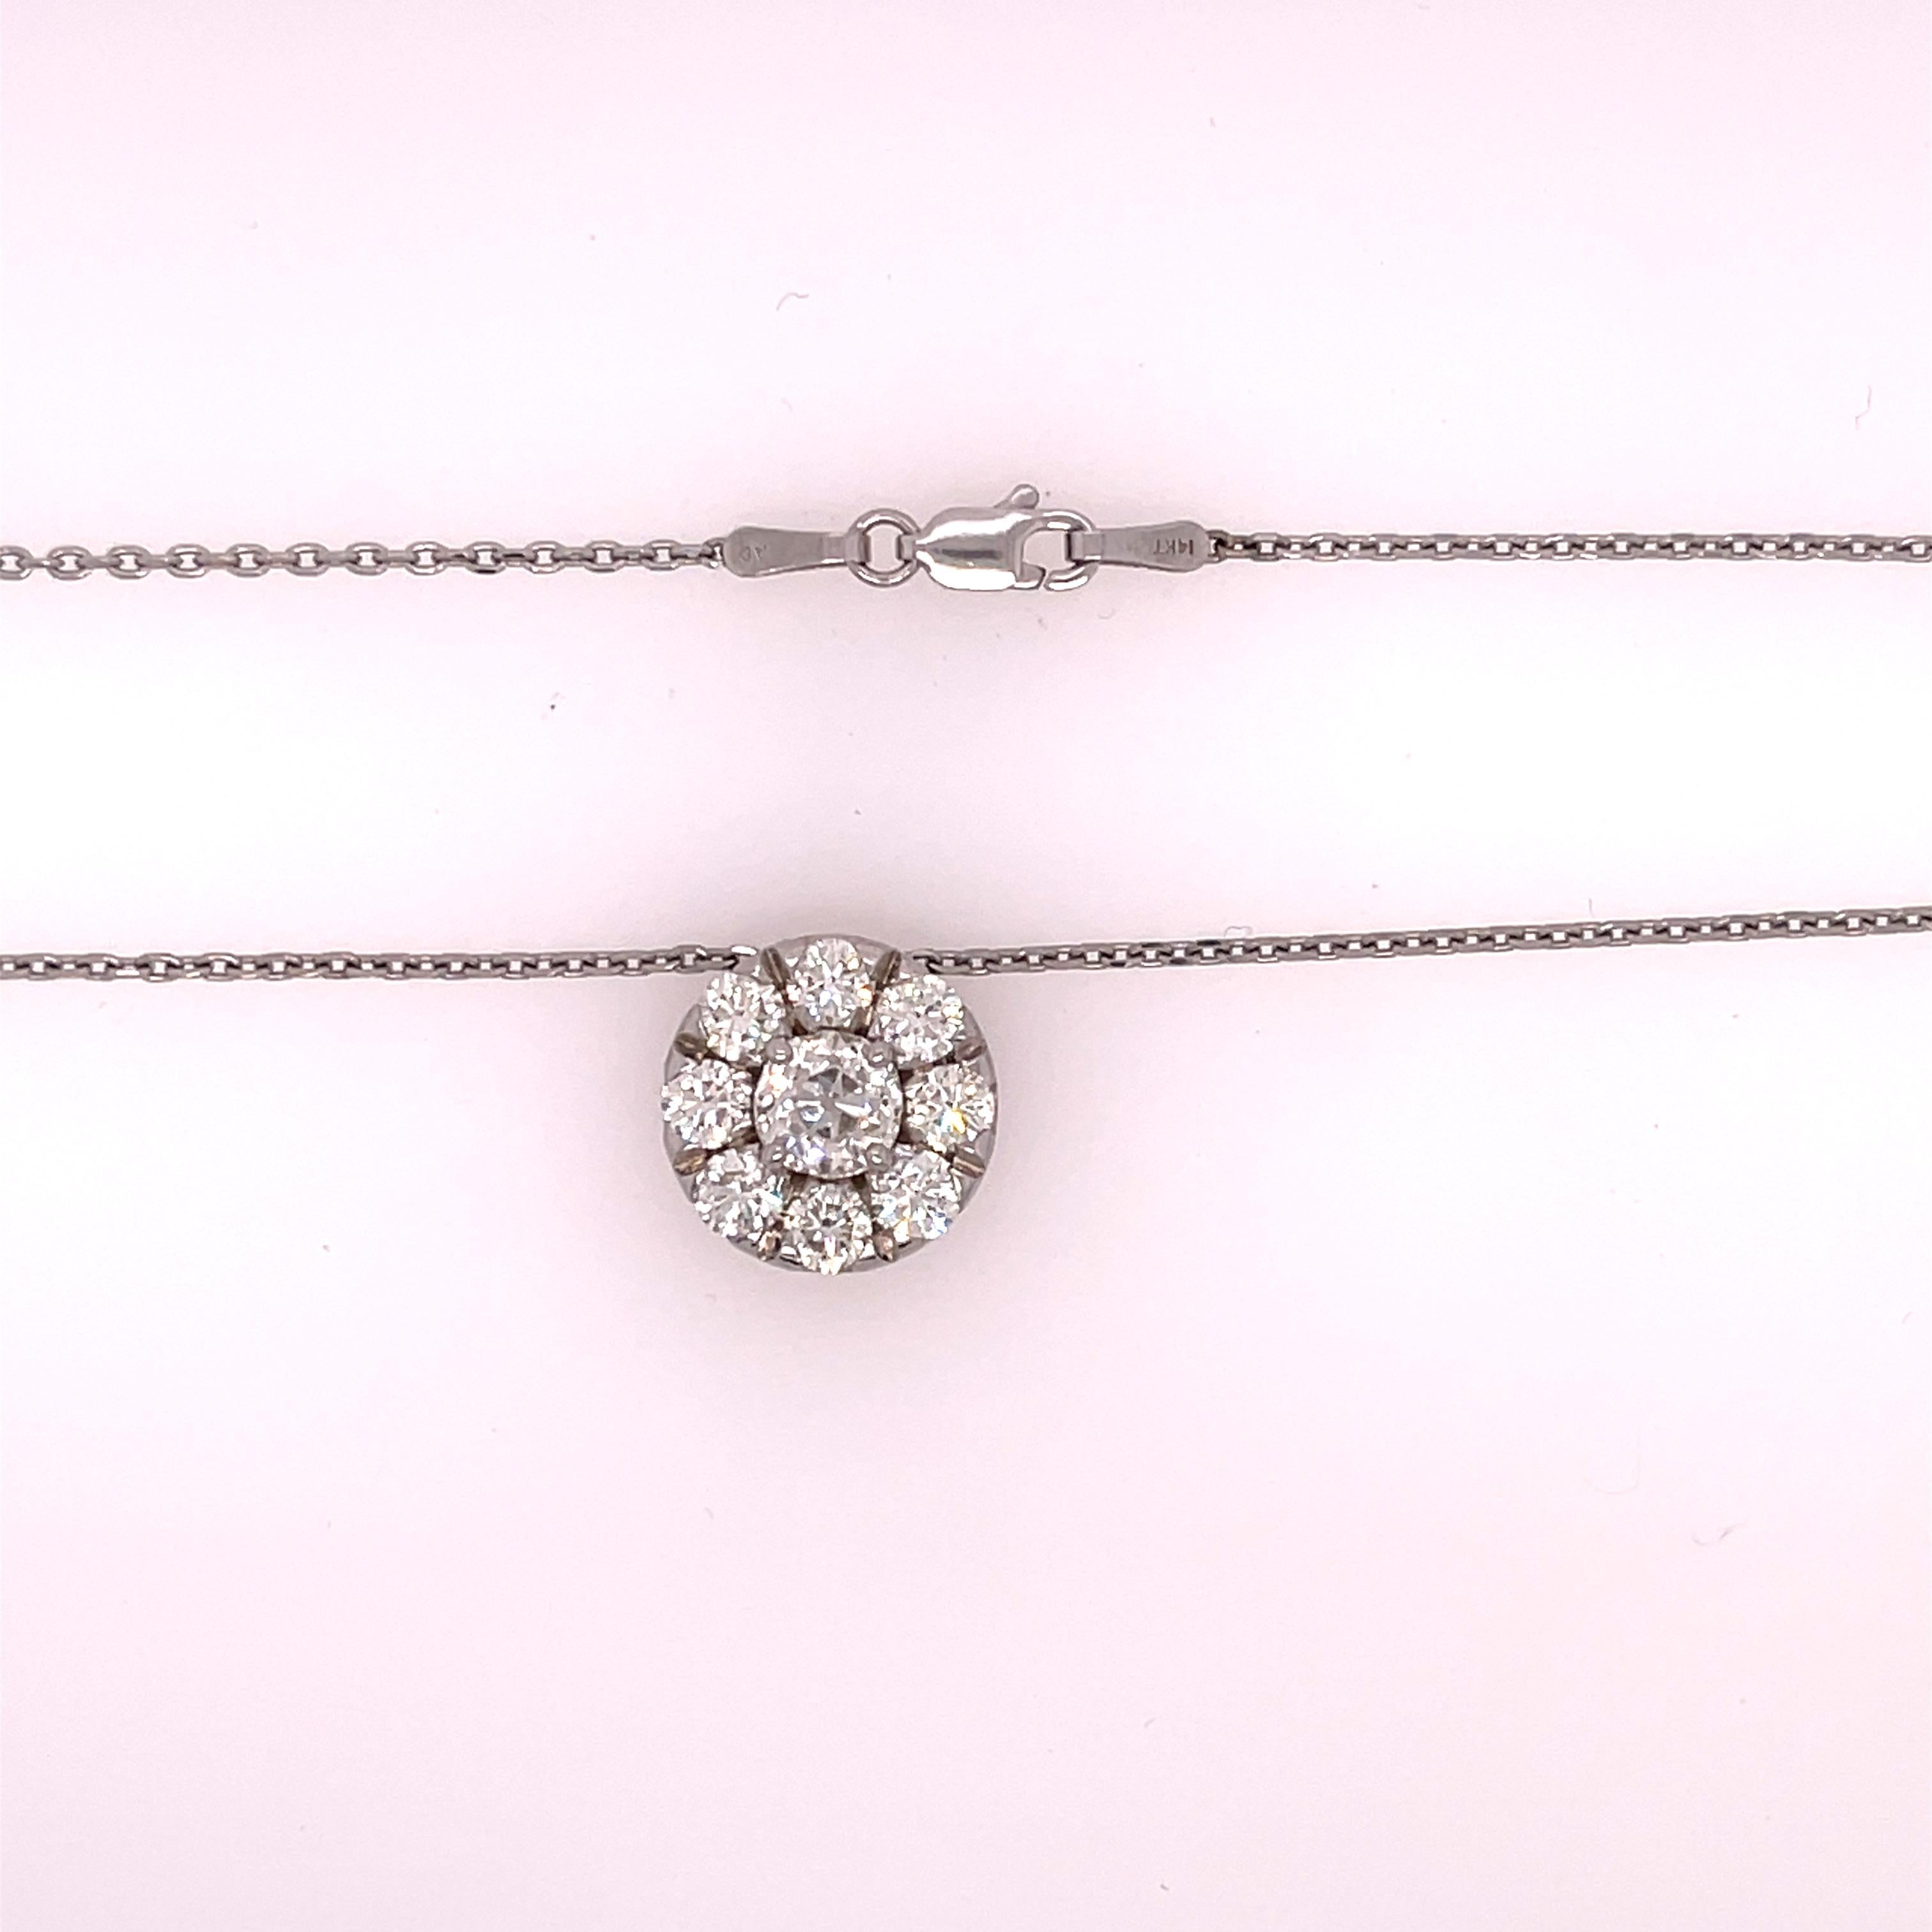 Ladies 14K white gold diamond cluster pendant necklace featuring a 1 carat euro cut diamond in the center. The halo features 8 brilliant round cut diamonds with a total weight of 1.52ct, I color and VS in clarity. The pendant is on a 16 inch 14k